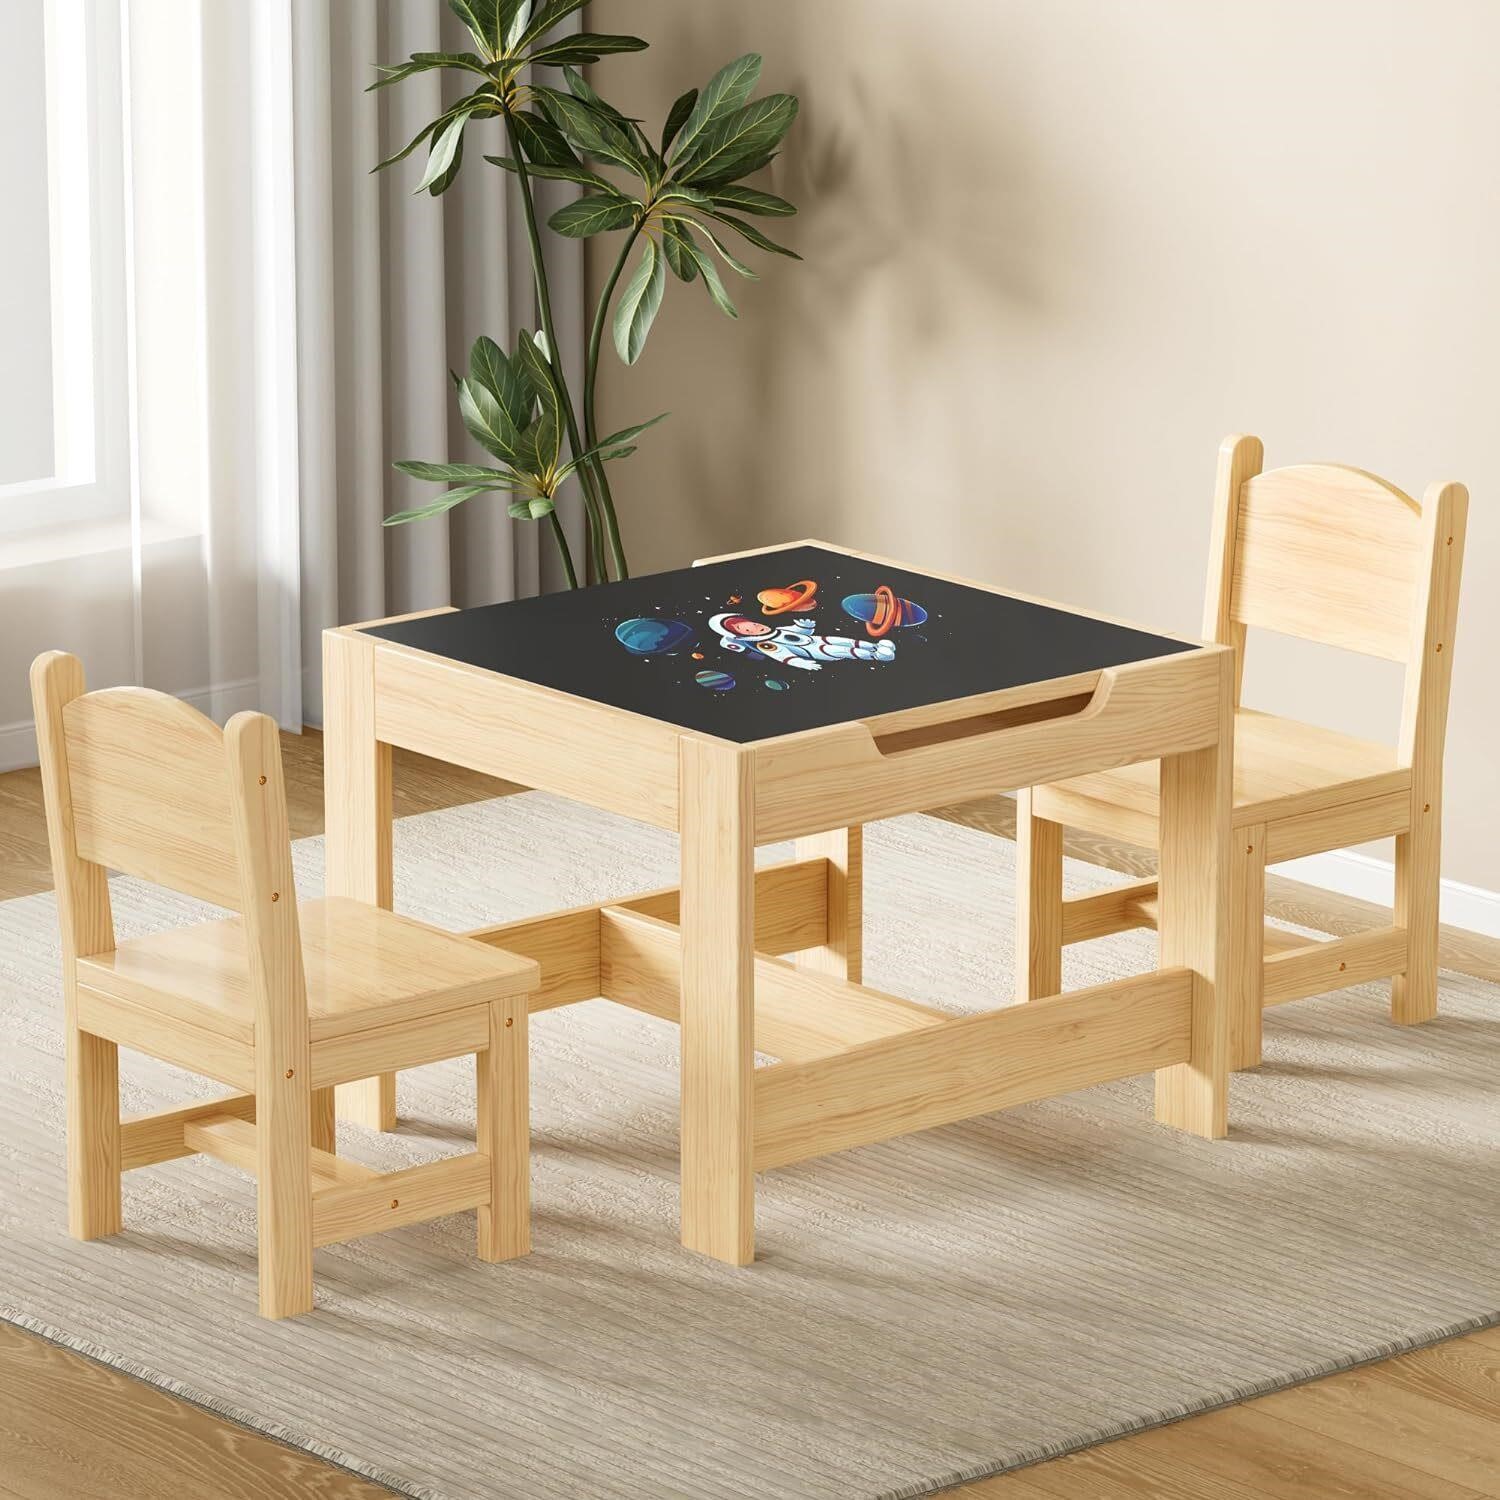 $110  Pine Wood Kids 3 in 1 Table & Chair Set